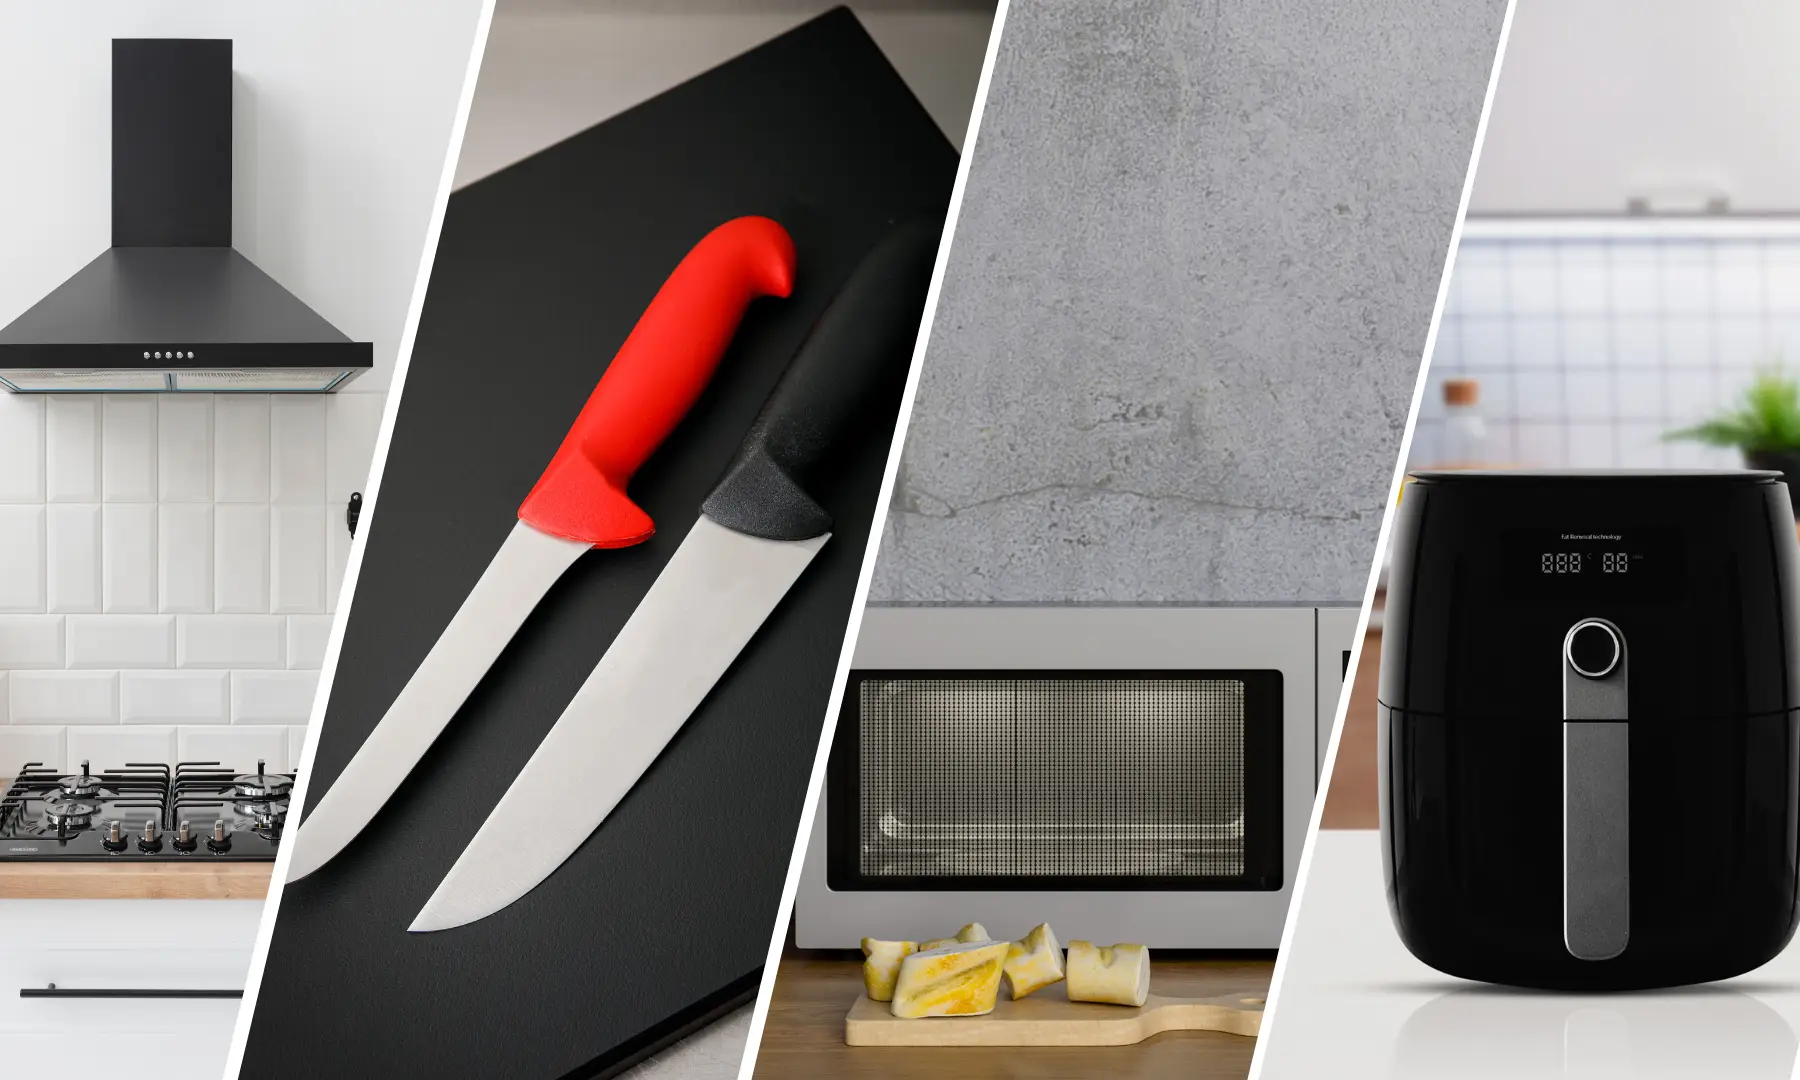 Top 10 Kitchen Tools And Appliances You Should Have At Home.webp